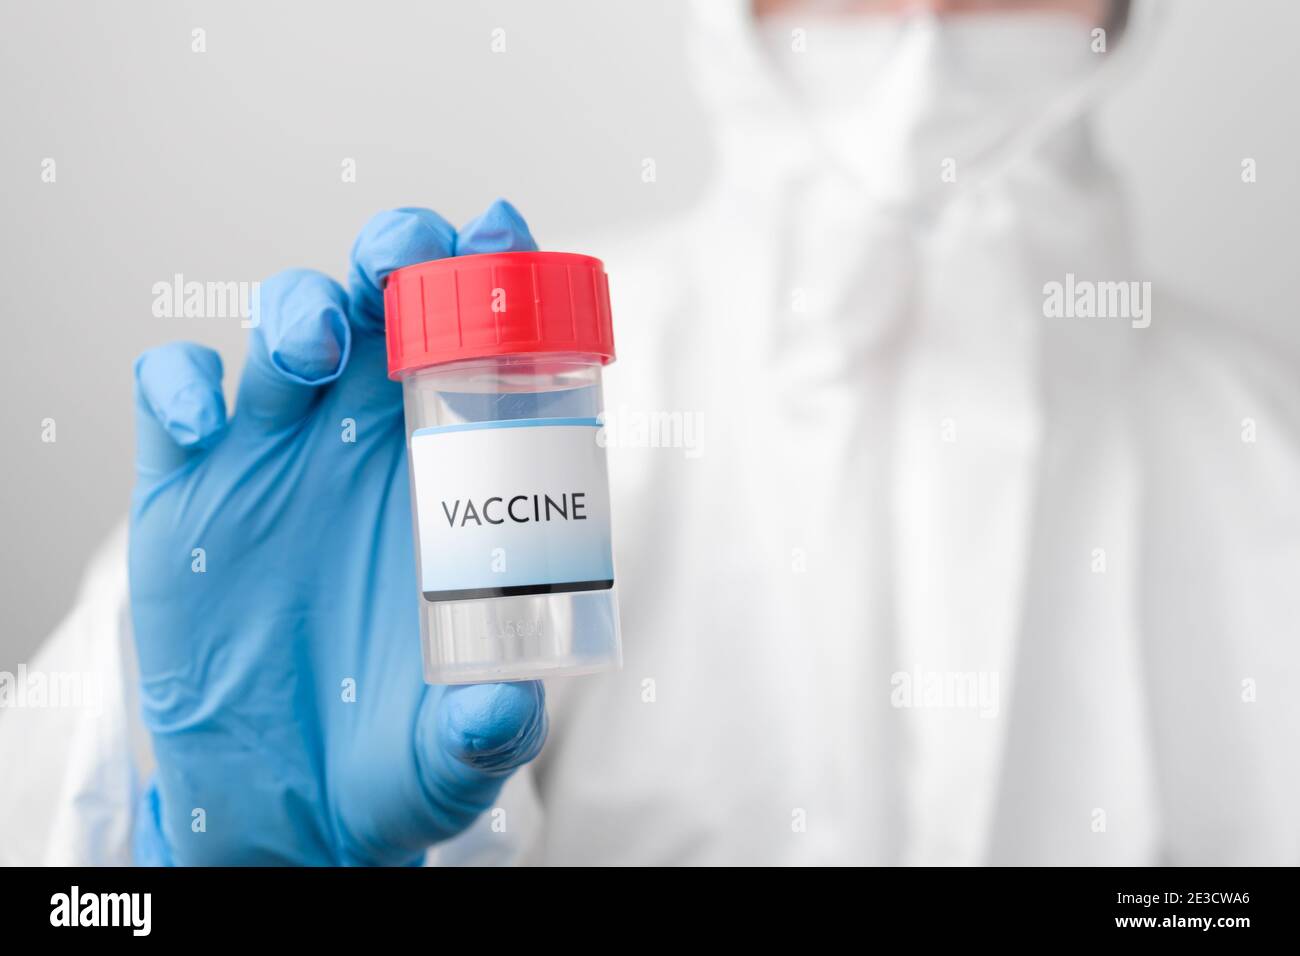 Covid 19 vaccine bottle in doctors hand. Doctor in protective suit, face mask, safety googles and rubber gloves demonstrate vaccine against Stock Photo